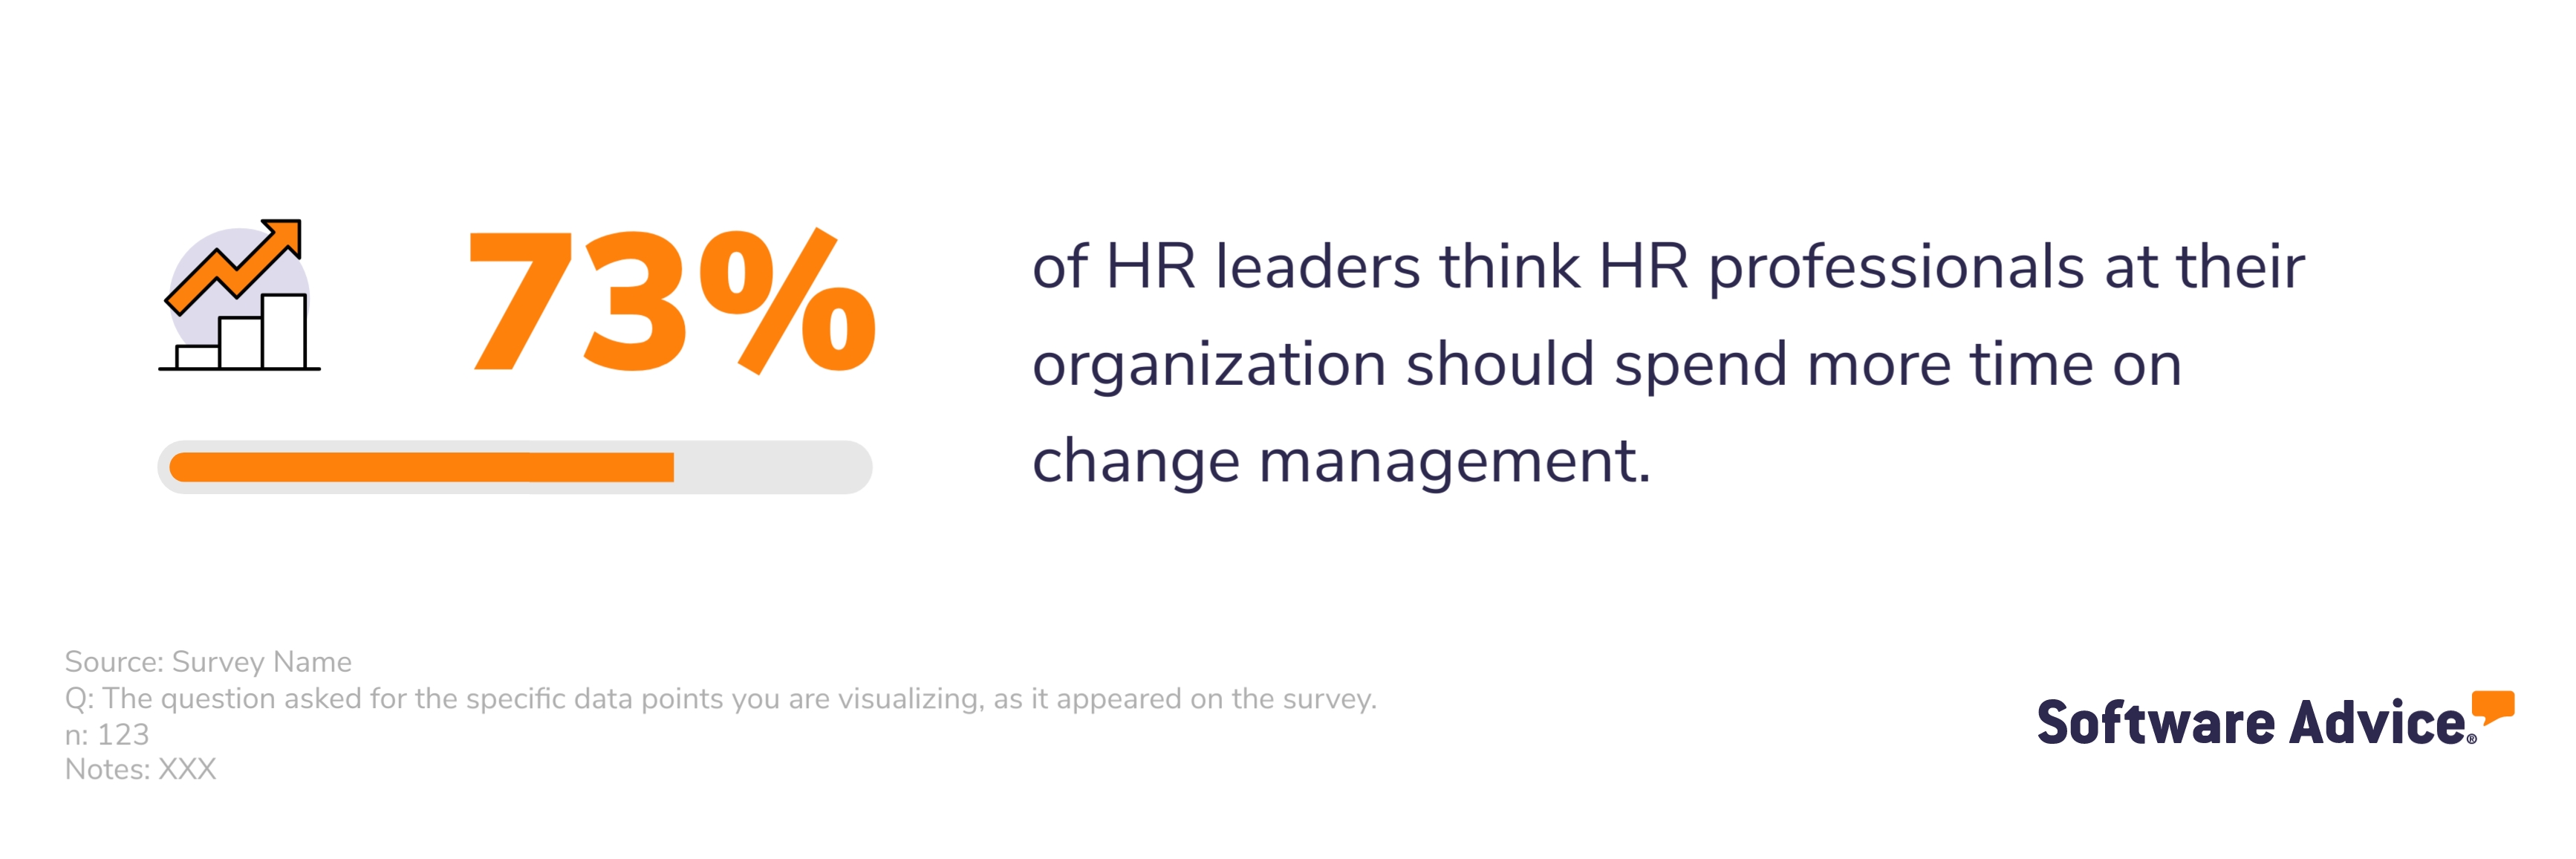 HR leaders agree that effectively managing change is an increasingly important component of the HRBP role: 73% think HR professionals at their organization should spend more time on change management.